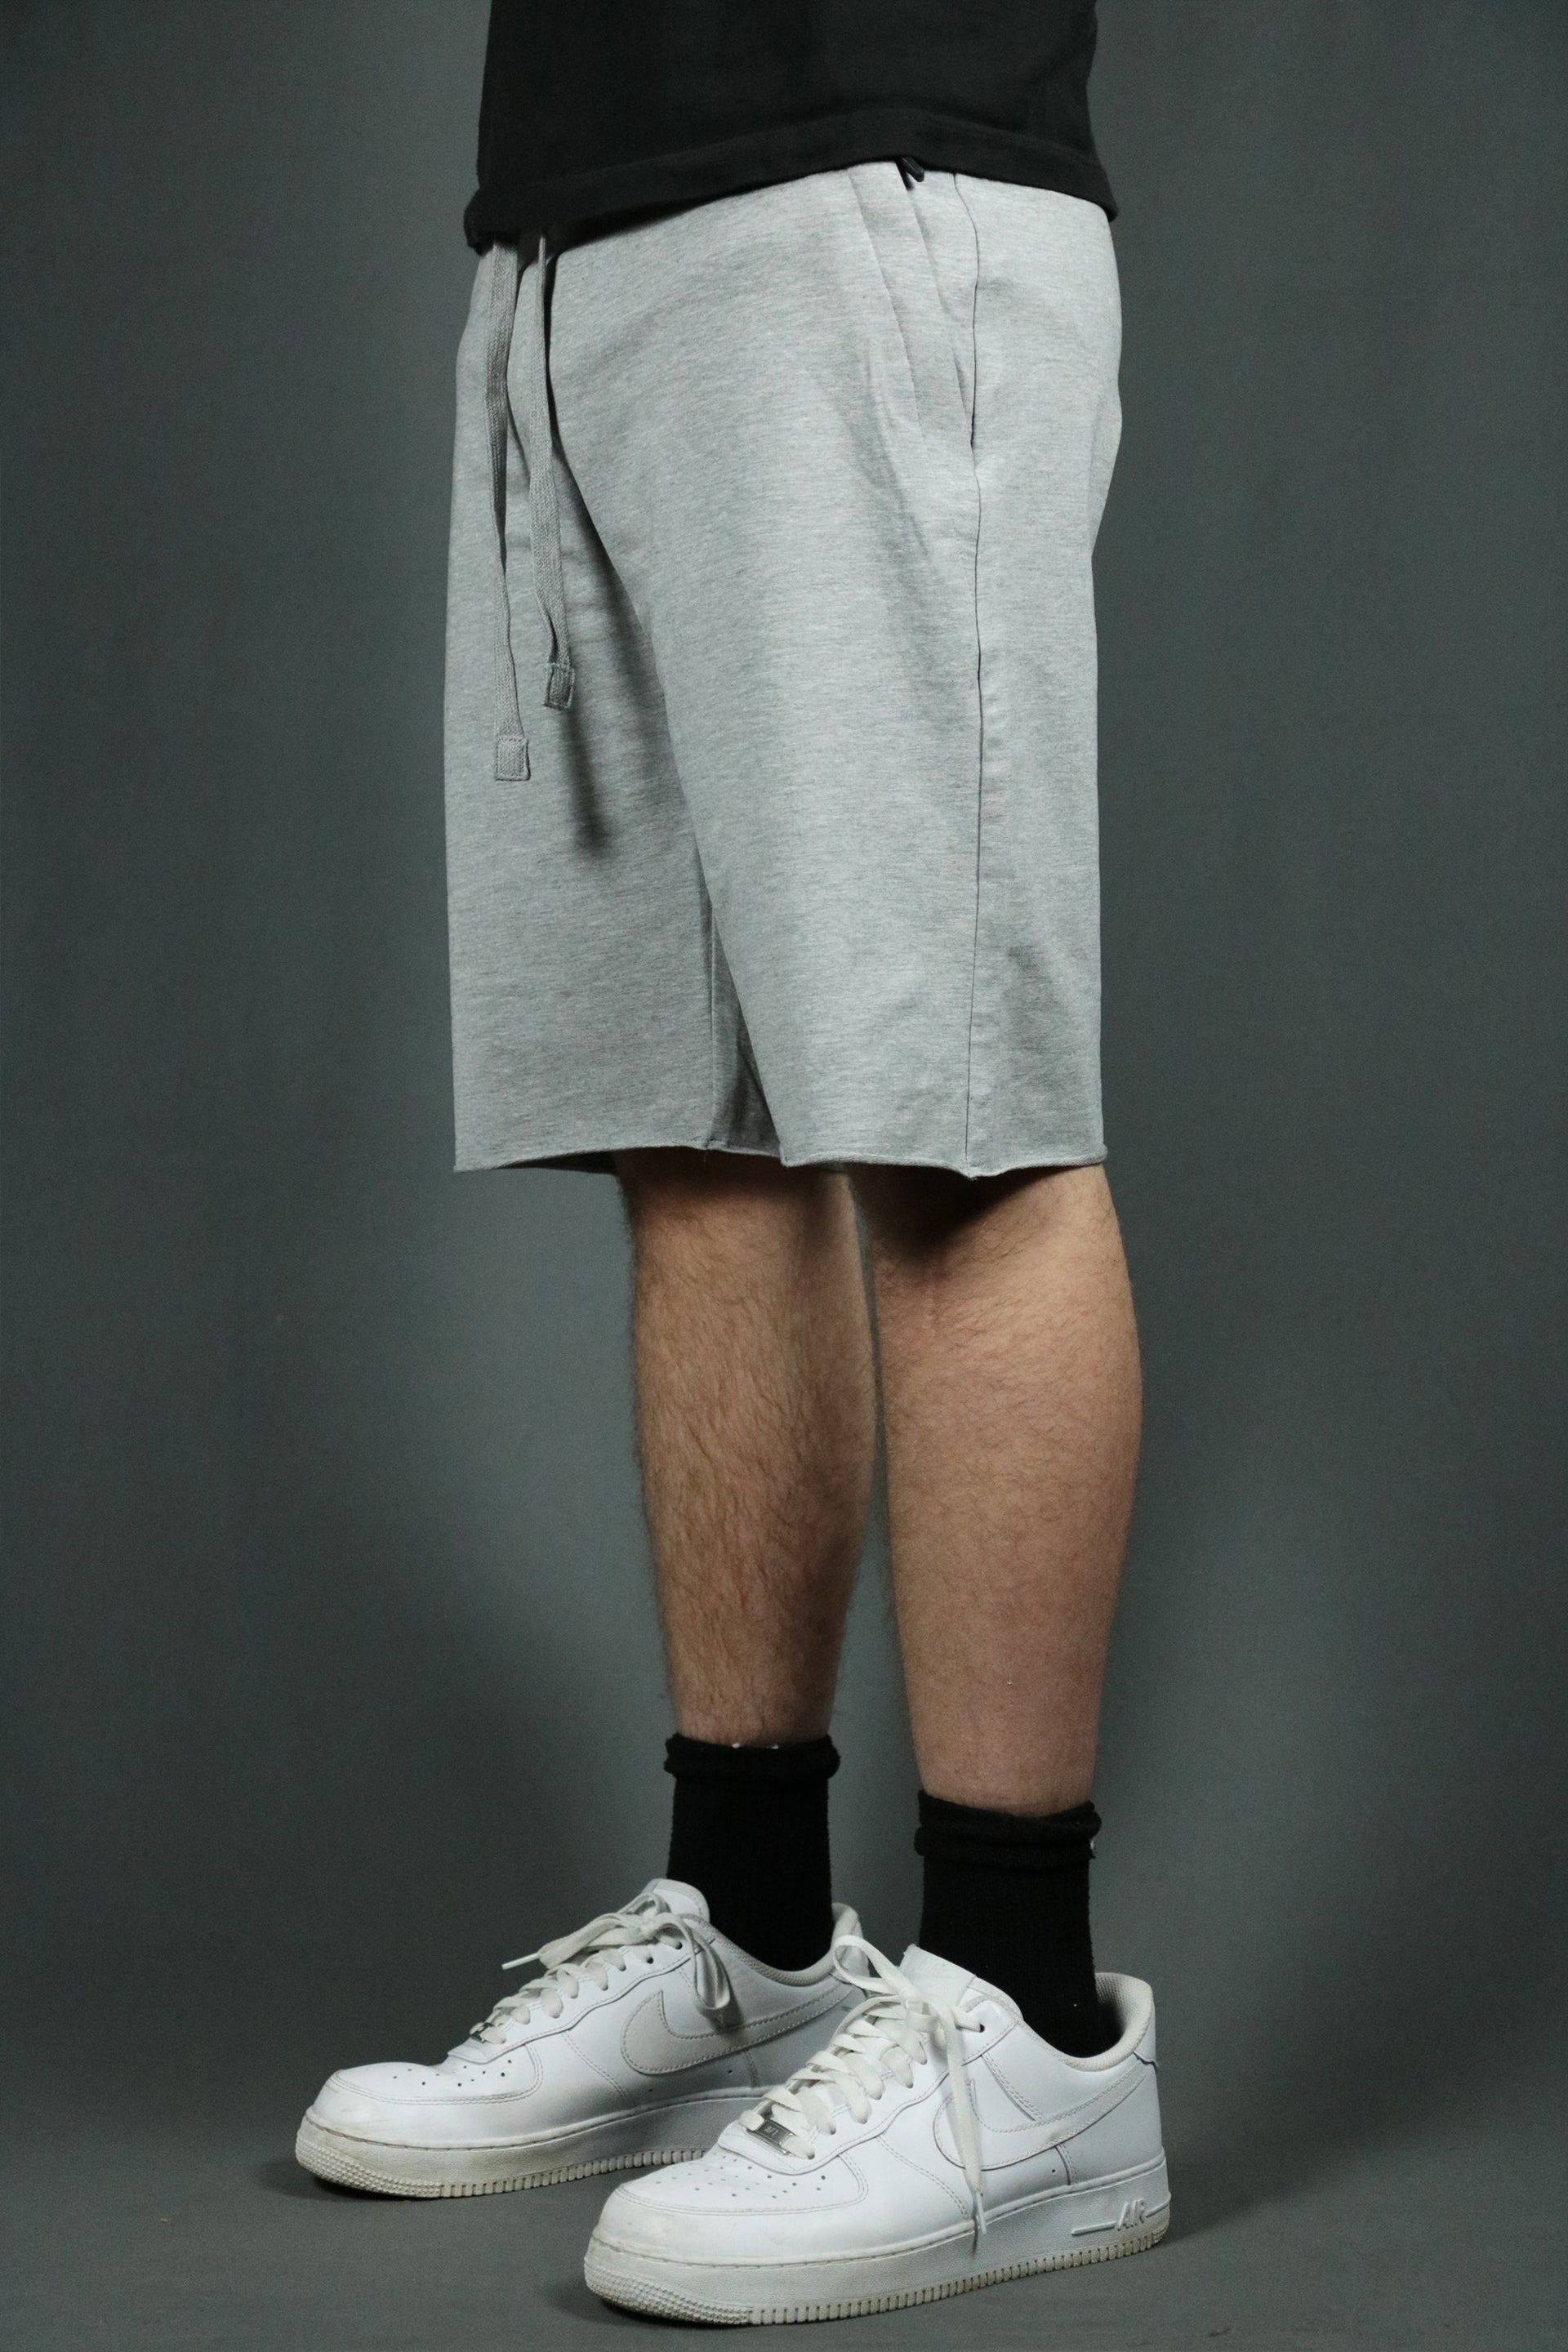 Model wearing the heather grey men's french terry shorts by Jordan Craig.